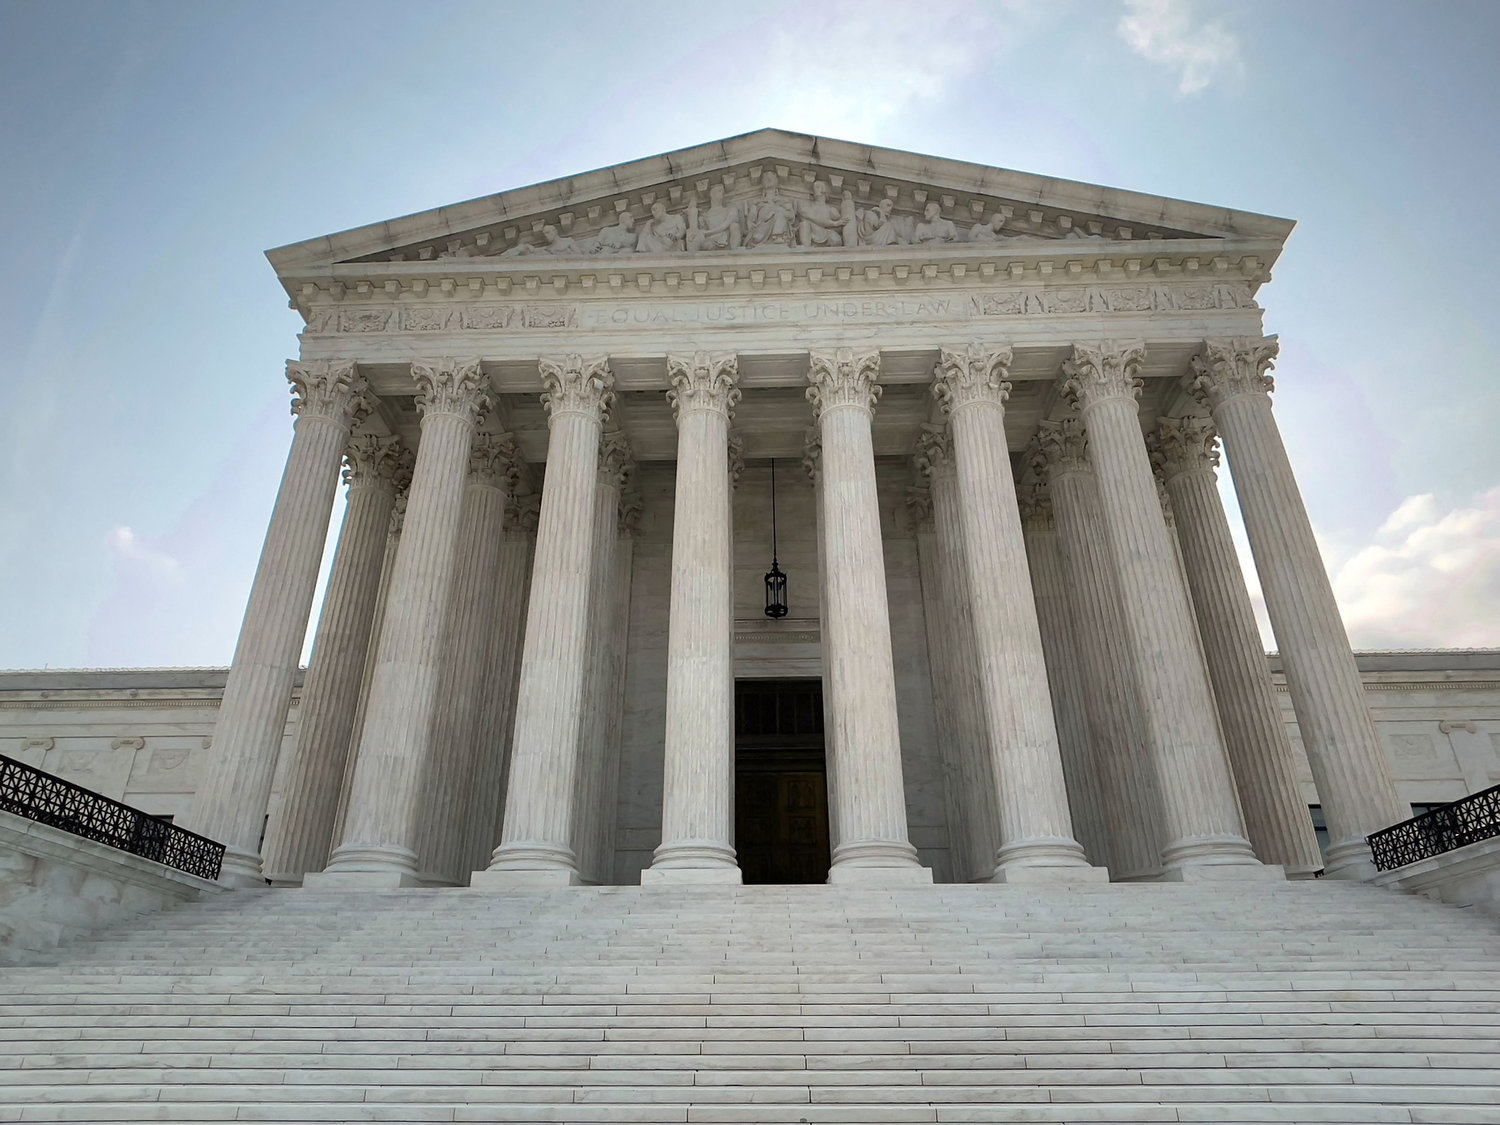 The U.S. Supreme Court building as seen on Sunday, July 11, 2021 in Washington, D.C. (Daniel Slim/AFP/Getty Images/TNS)